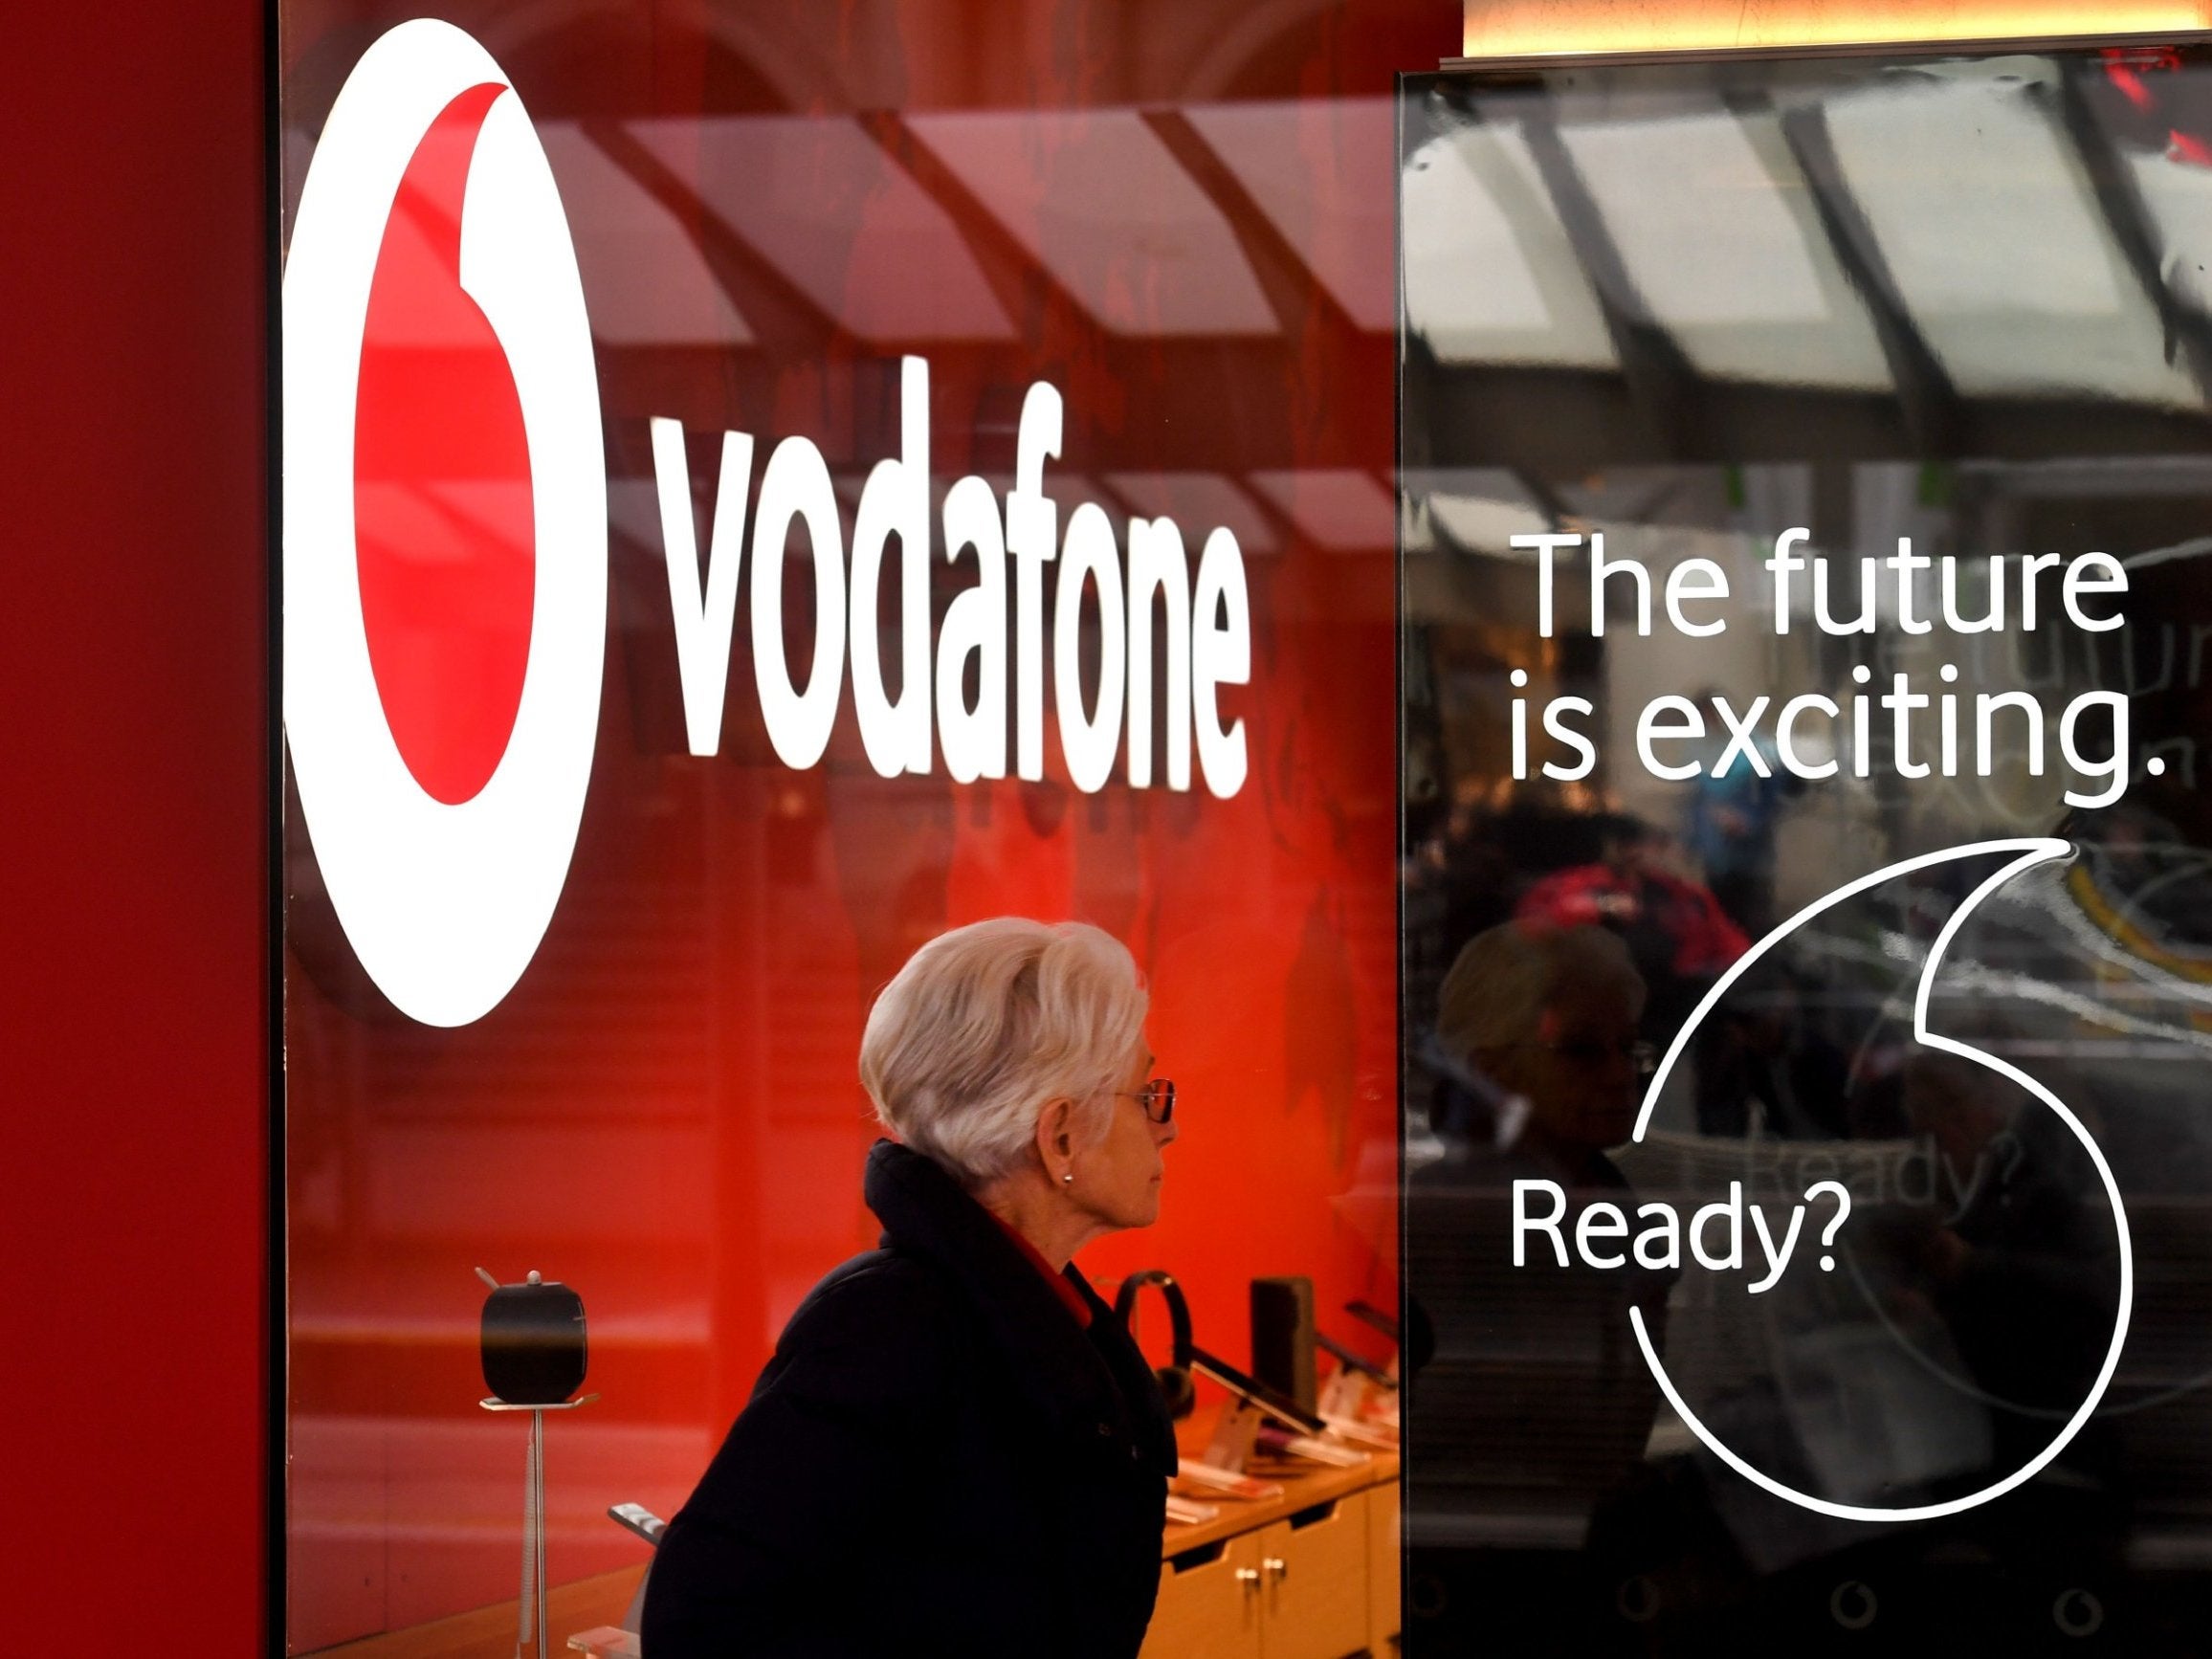 Vodafone was recently crowned the worst mobile network in the UK for customer service